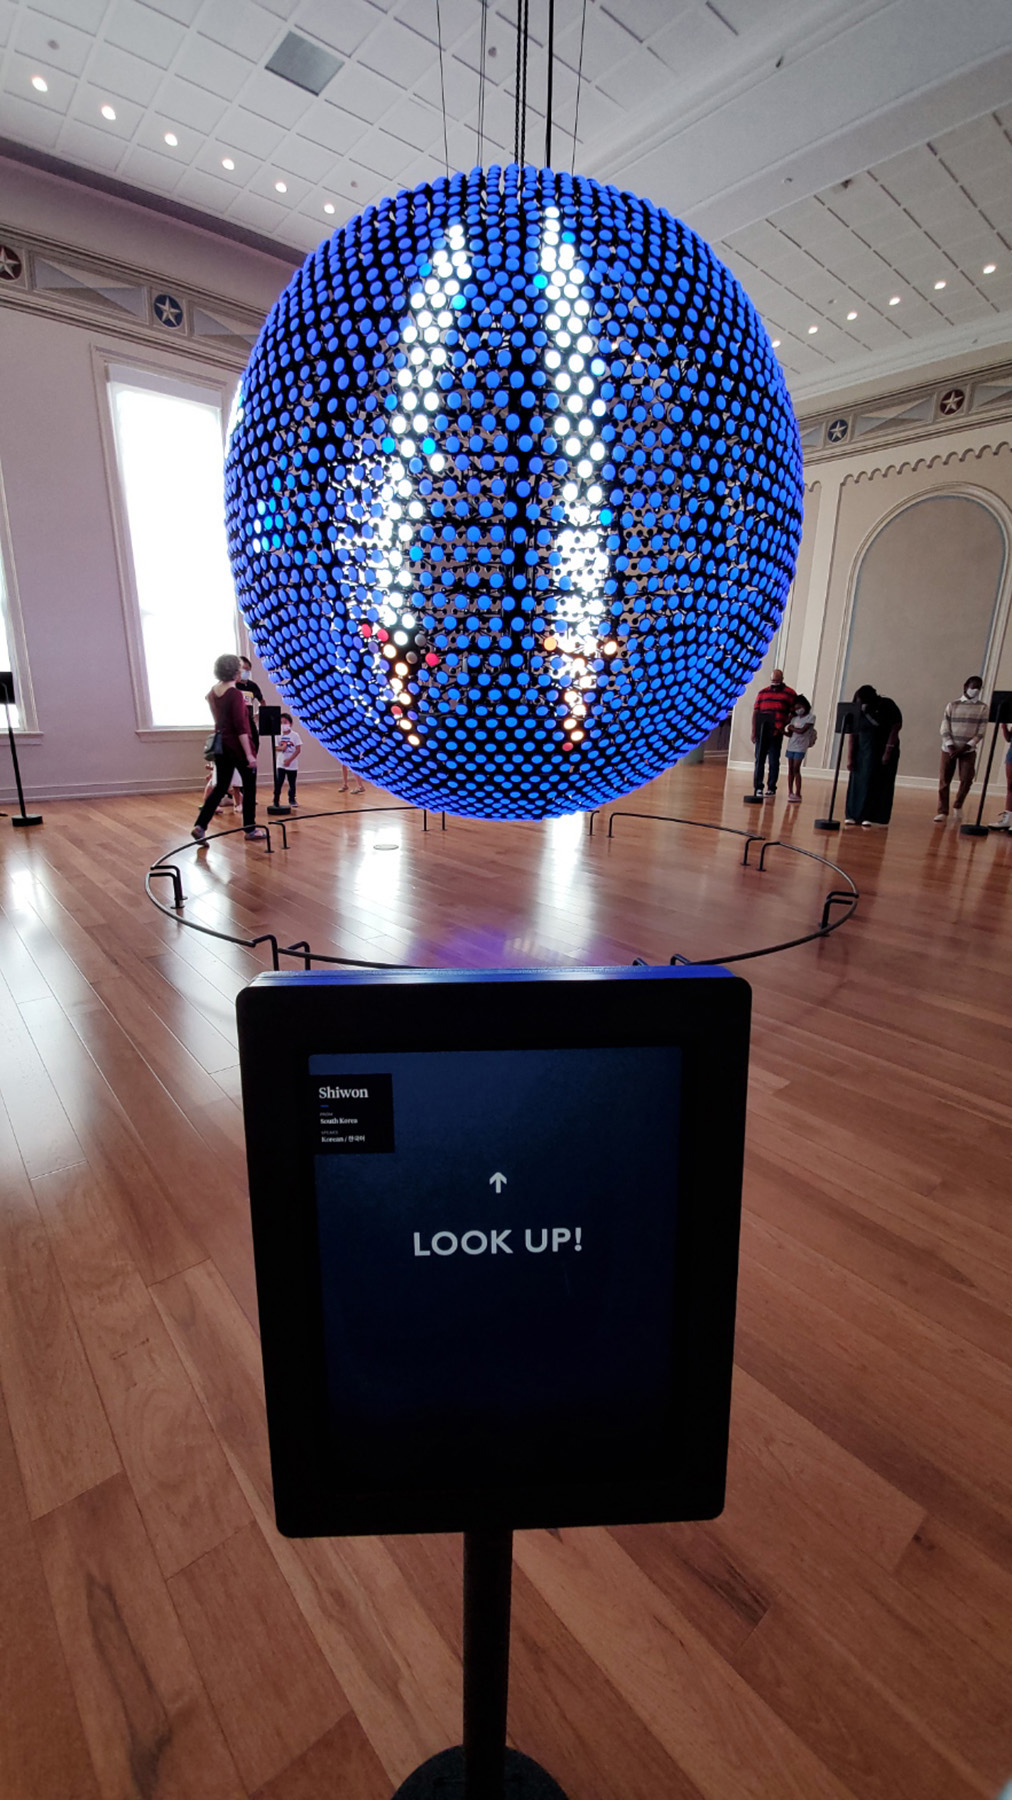 Almost exactly the same as the previous image, but this time the touch screen in the foreground simply has the words Look Up in the center with an arrow pointing to the top of the screen. The lights on the LED globe have changed; the land masses have disappeared and a graphic of two bright white swords surrounded by blue has replaced them.